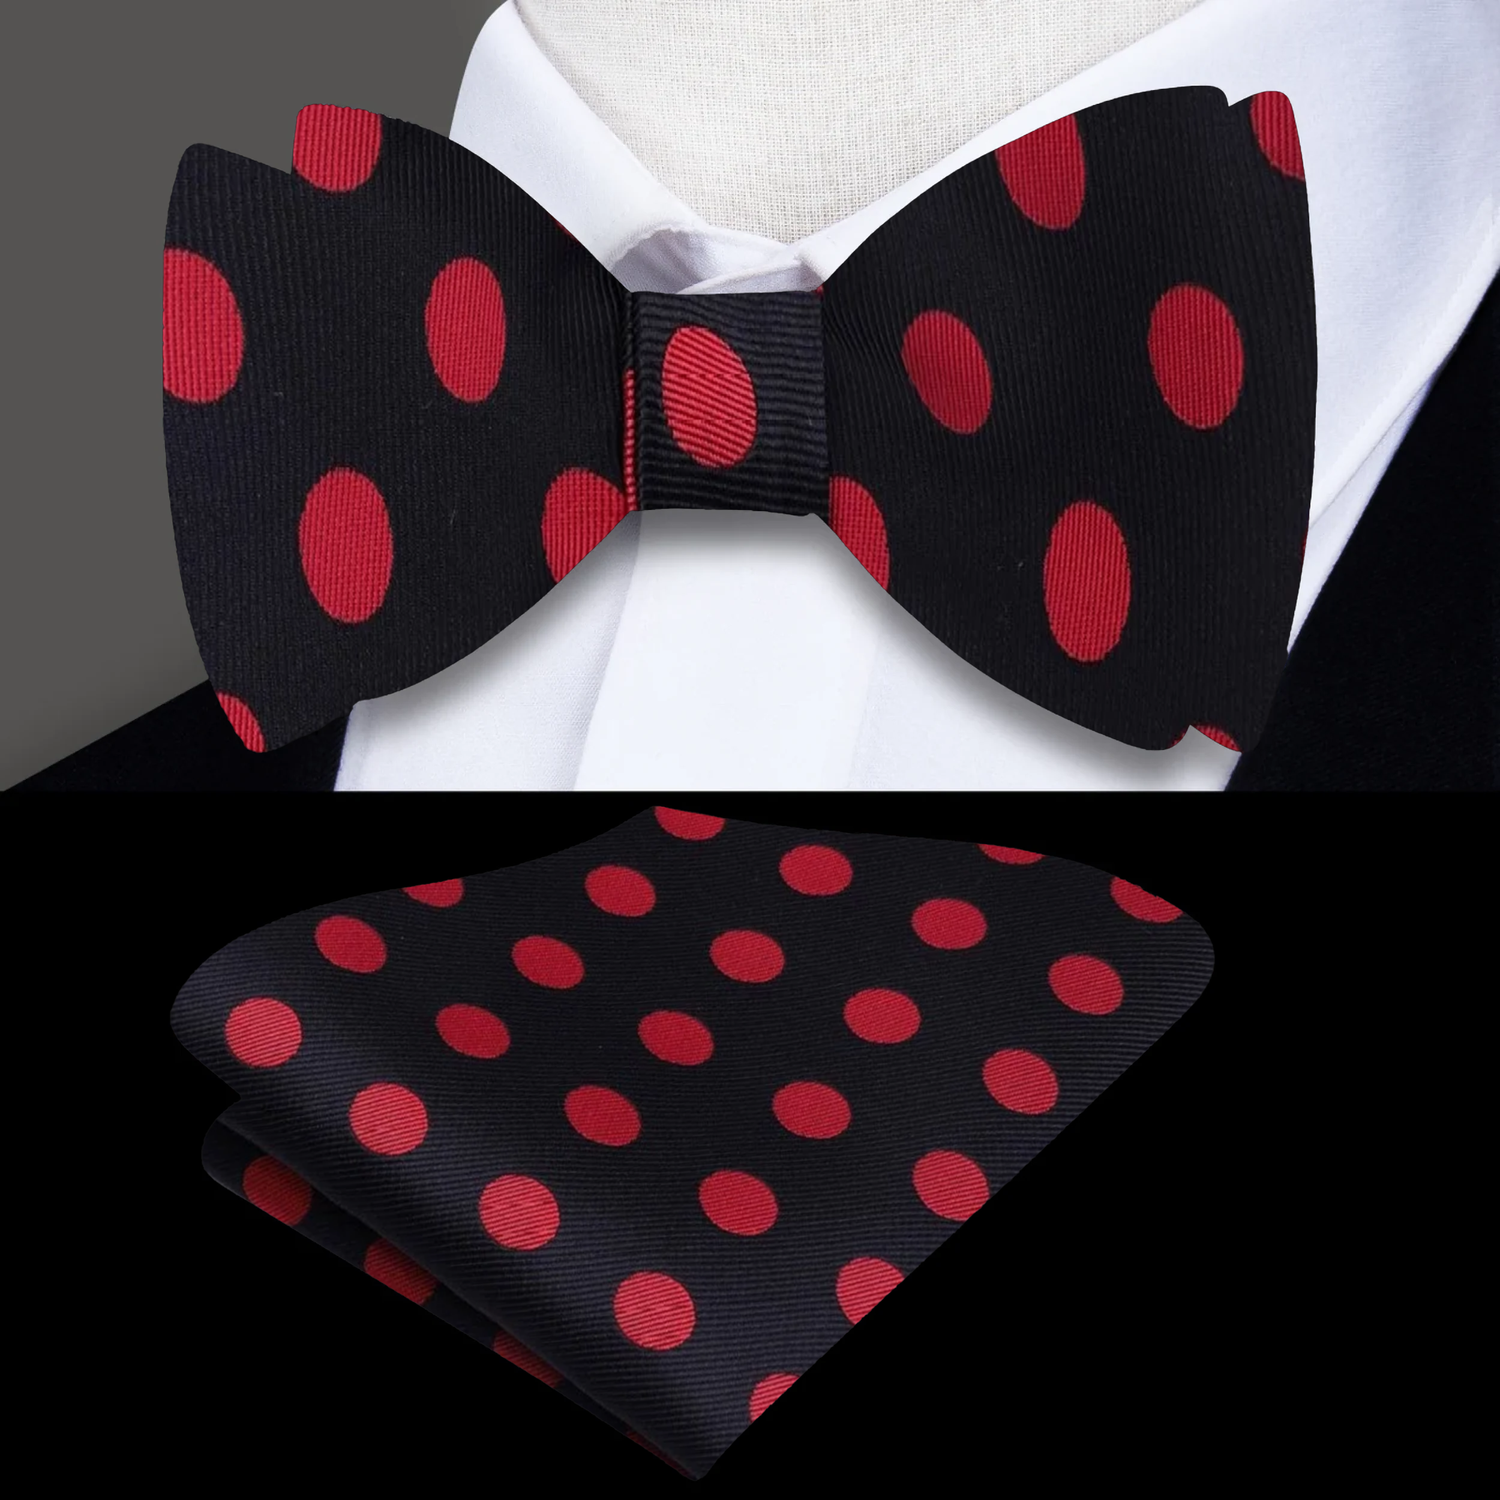 Main: A Black, Red Polka Pattern Silk Pre Tied Bow Tie, Matching Pocket Square